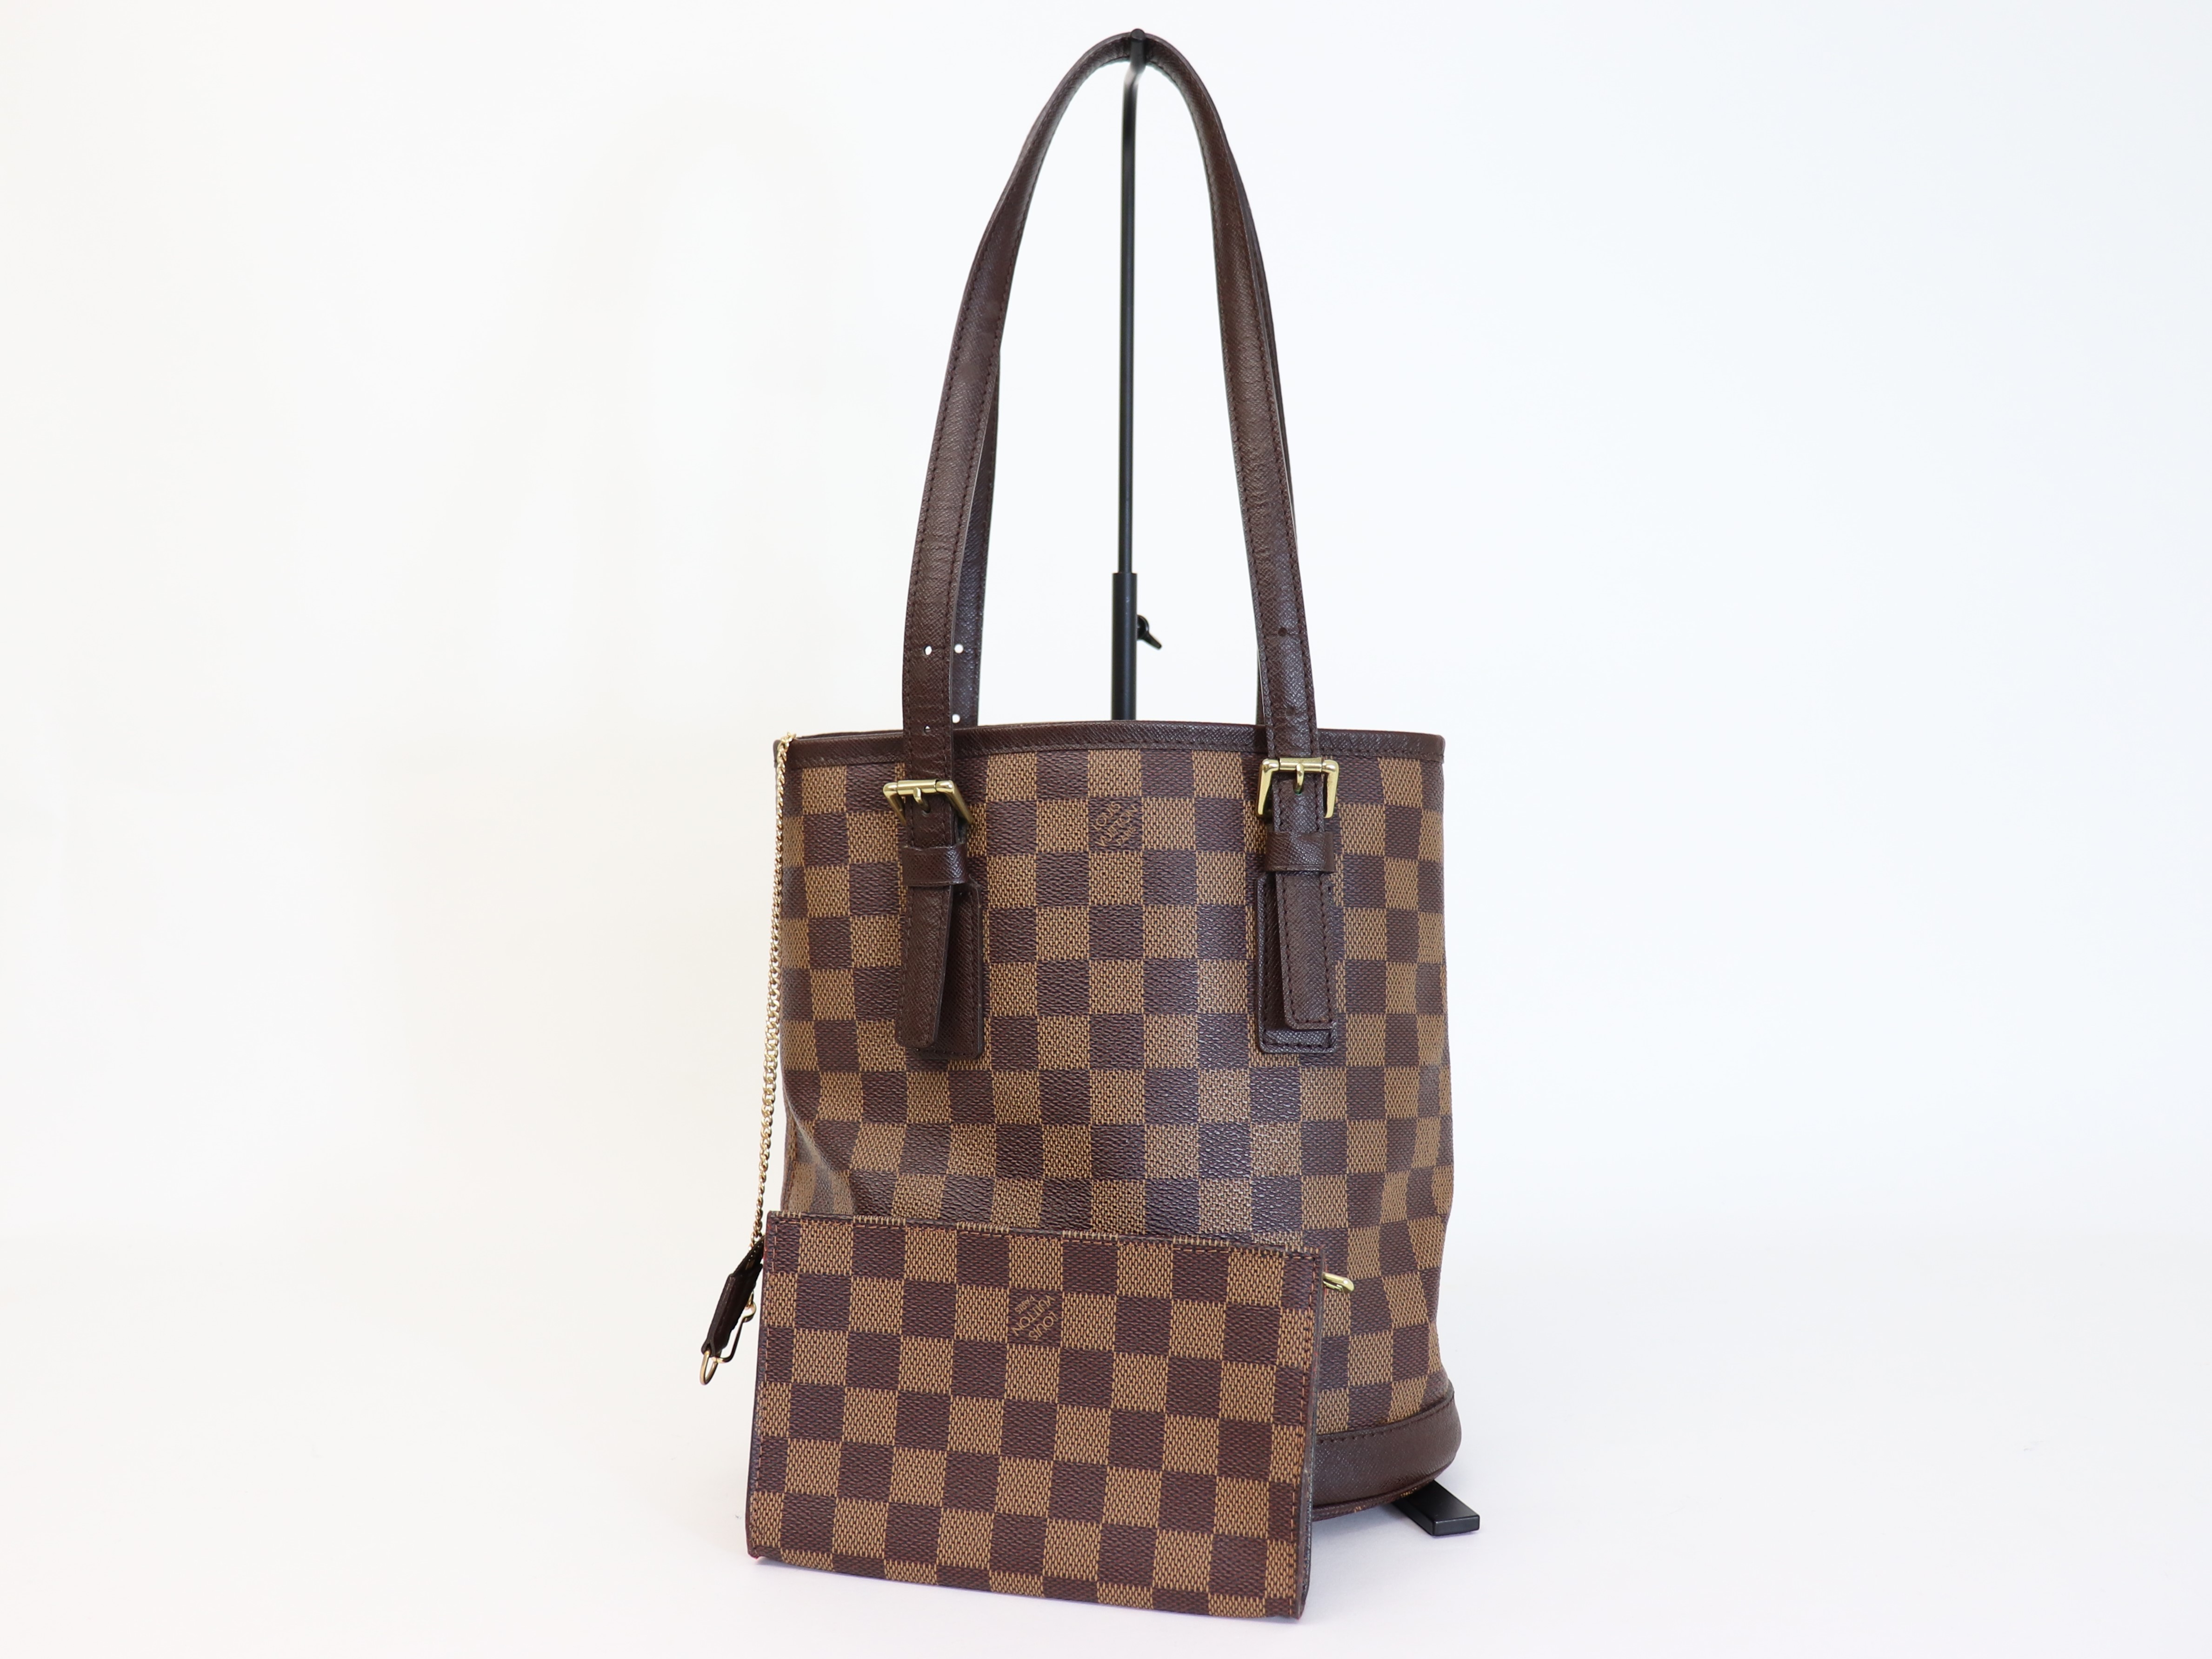 LOUIS VUITTON ルイヴィトン ダミエ マレ N42240 - トートバッグ